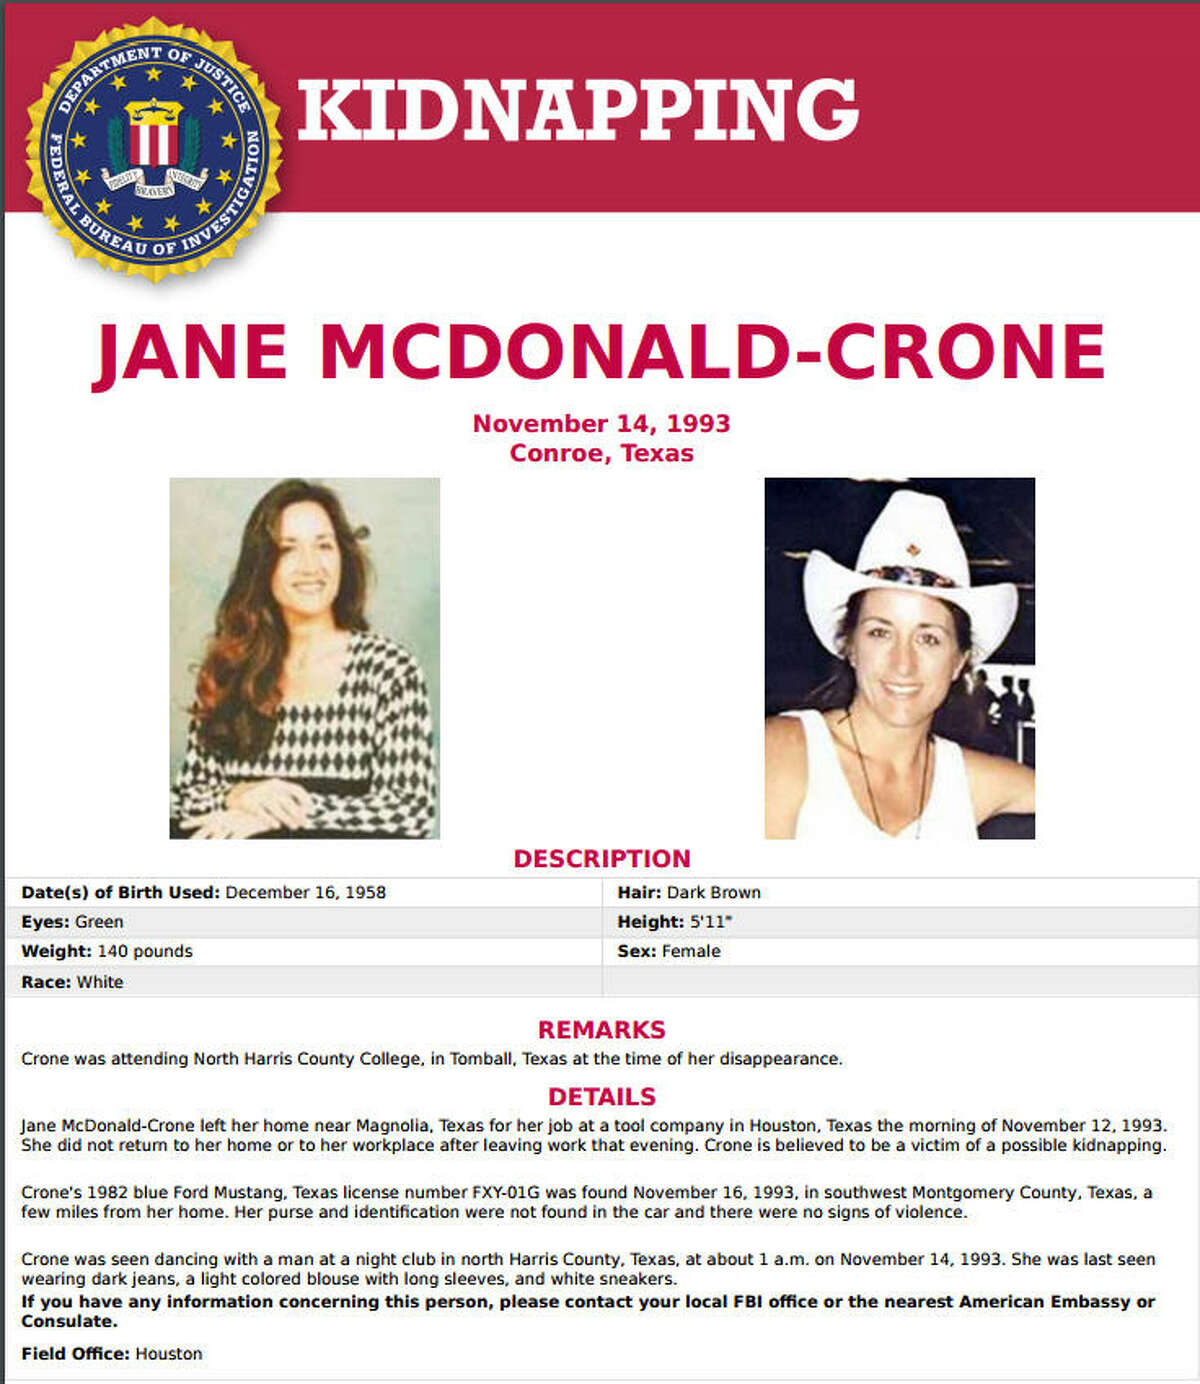 Federal involvement The FBI considers the disappearance of Jane McDonald-Crone on Nov. 13, 1993 a kidnapping. The agency has added her to the database of unsolved disappearances. She was last seen Nov. 16, 1993 with an unknown man at a nightclub in Harris County. Scroll through the gallery to see other cases of missing people around Texas